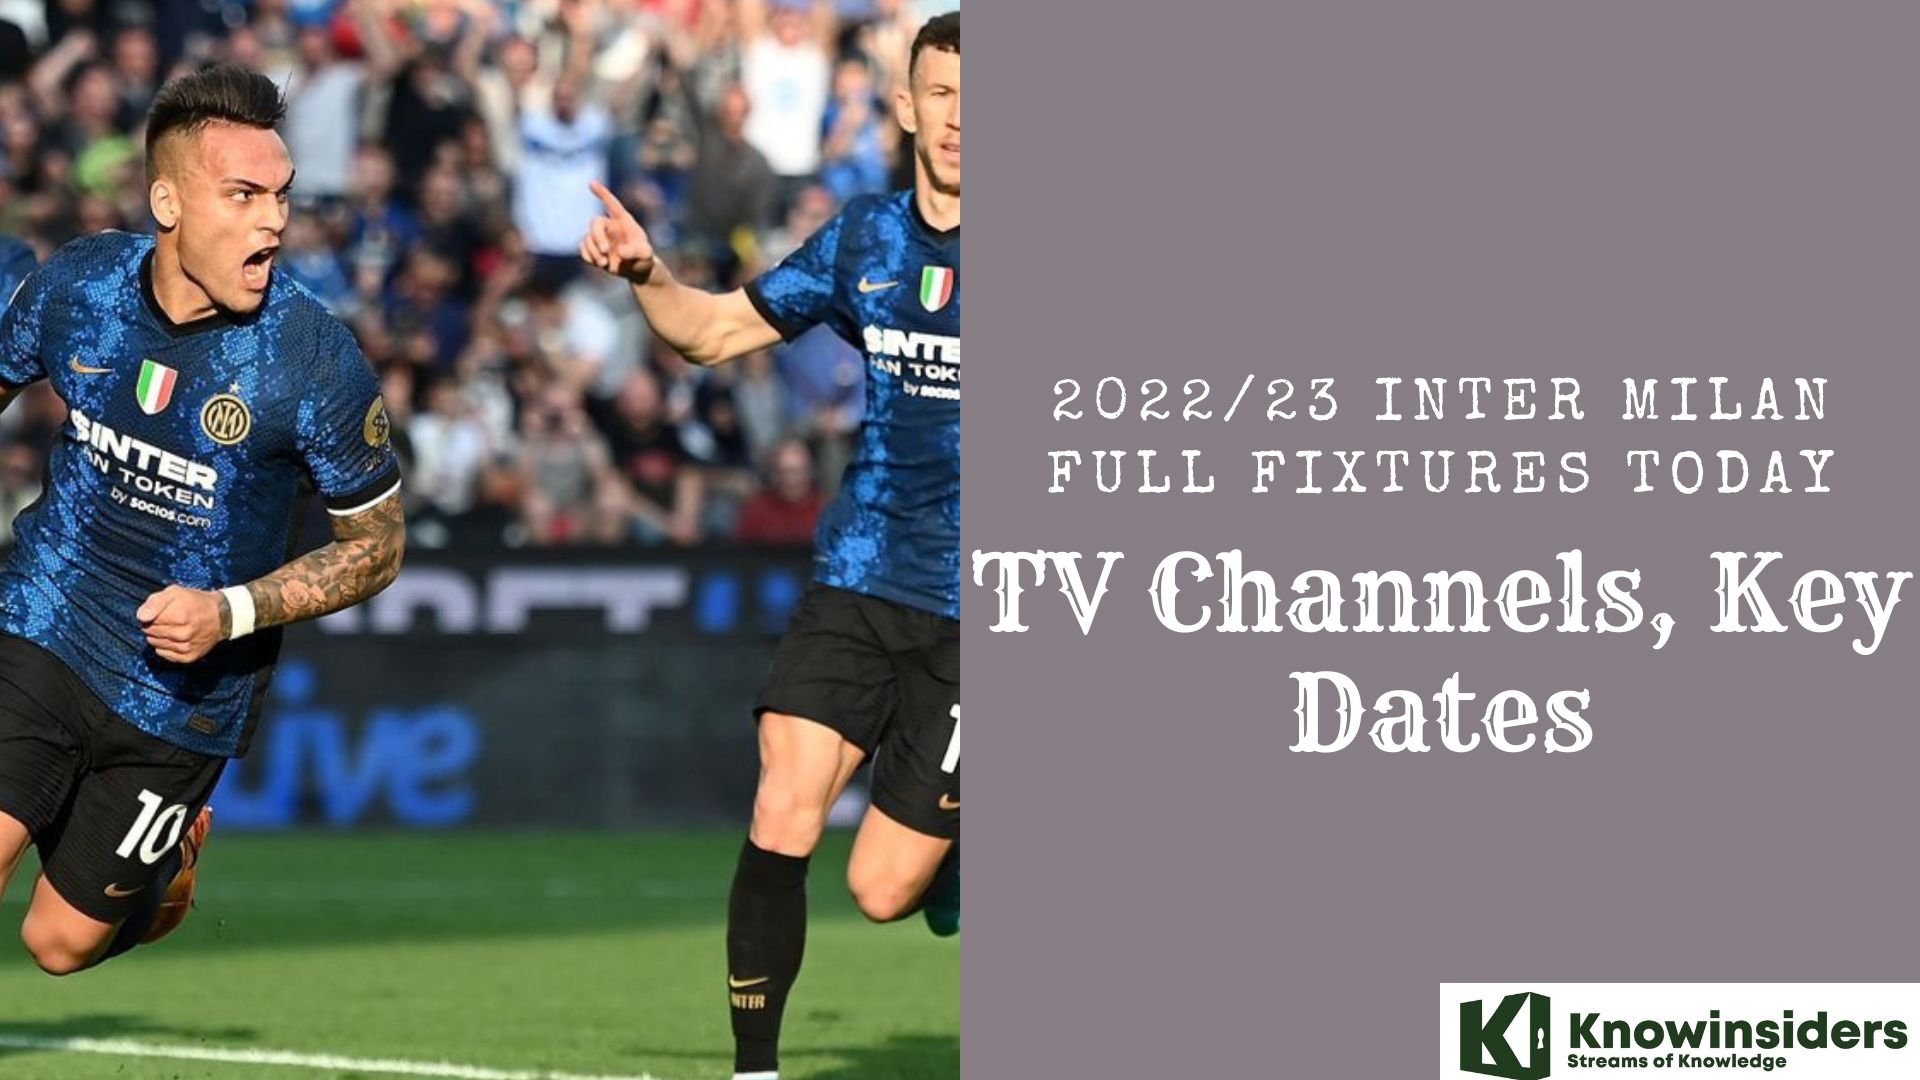 2022/23 Inter Milan Full Fixtures Today: TV Channels, Key Dates and Prediction